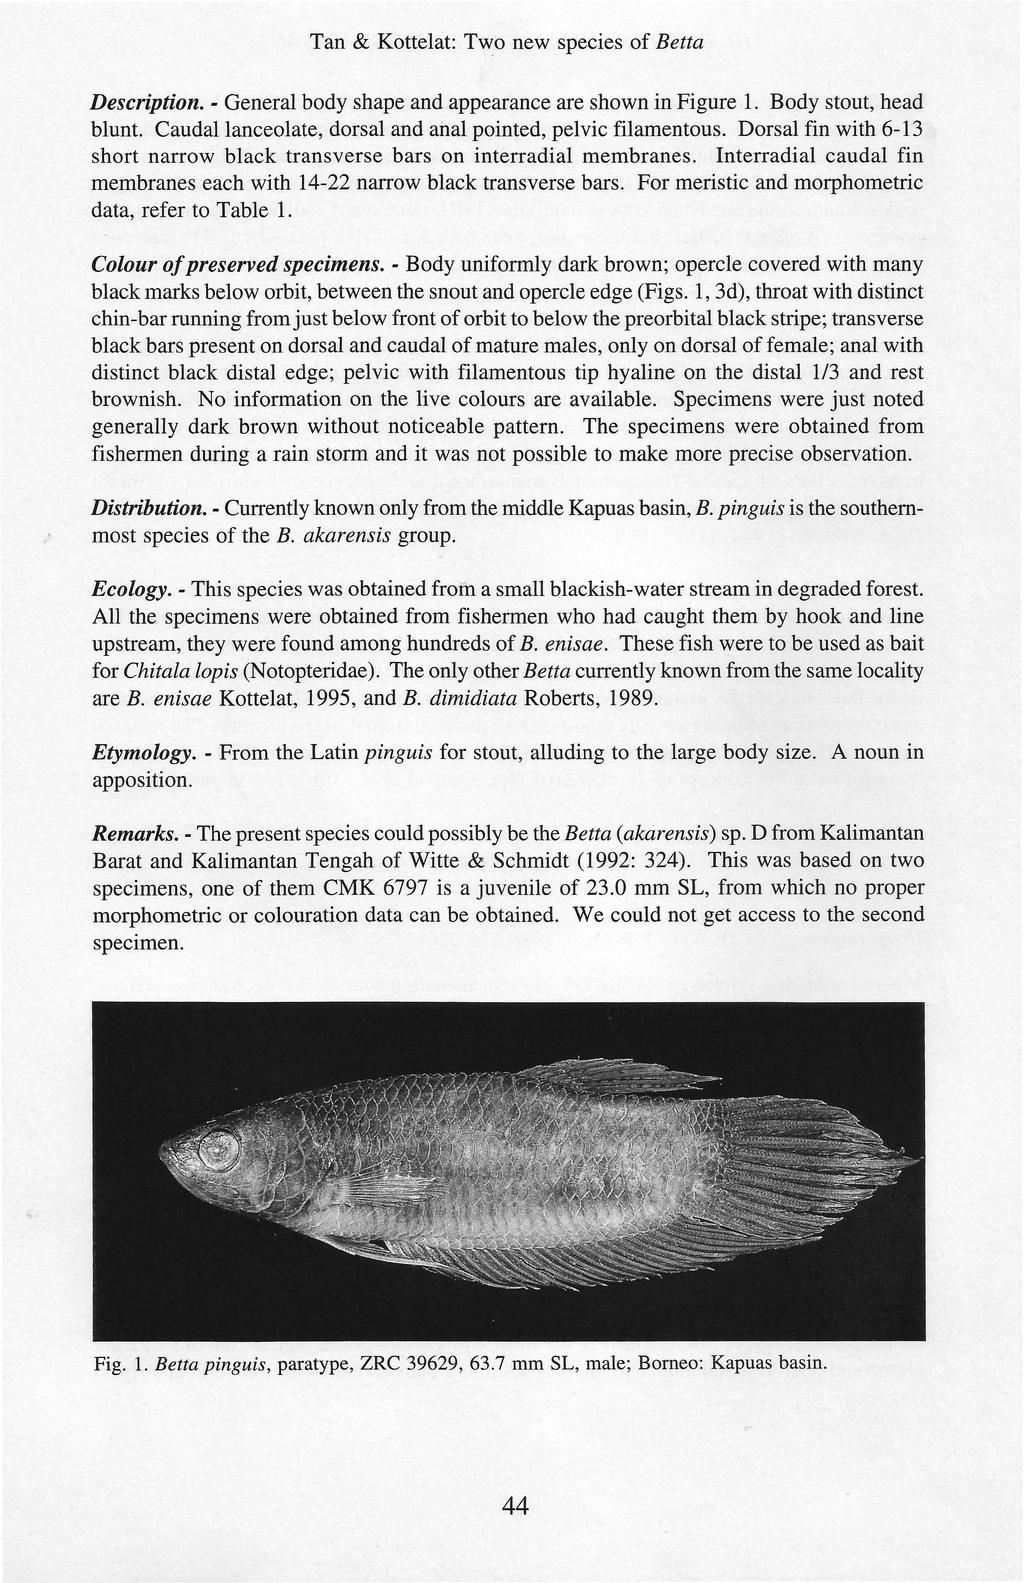 Tan & Kottelat: Two new species of Betta Description. - General body shape and appearance are shown in Figure 1. Body stout, head blunt. Caudallanceolate, dorsal and anal pointed, pelvic filamentous.